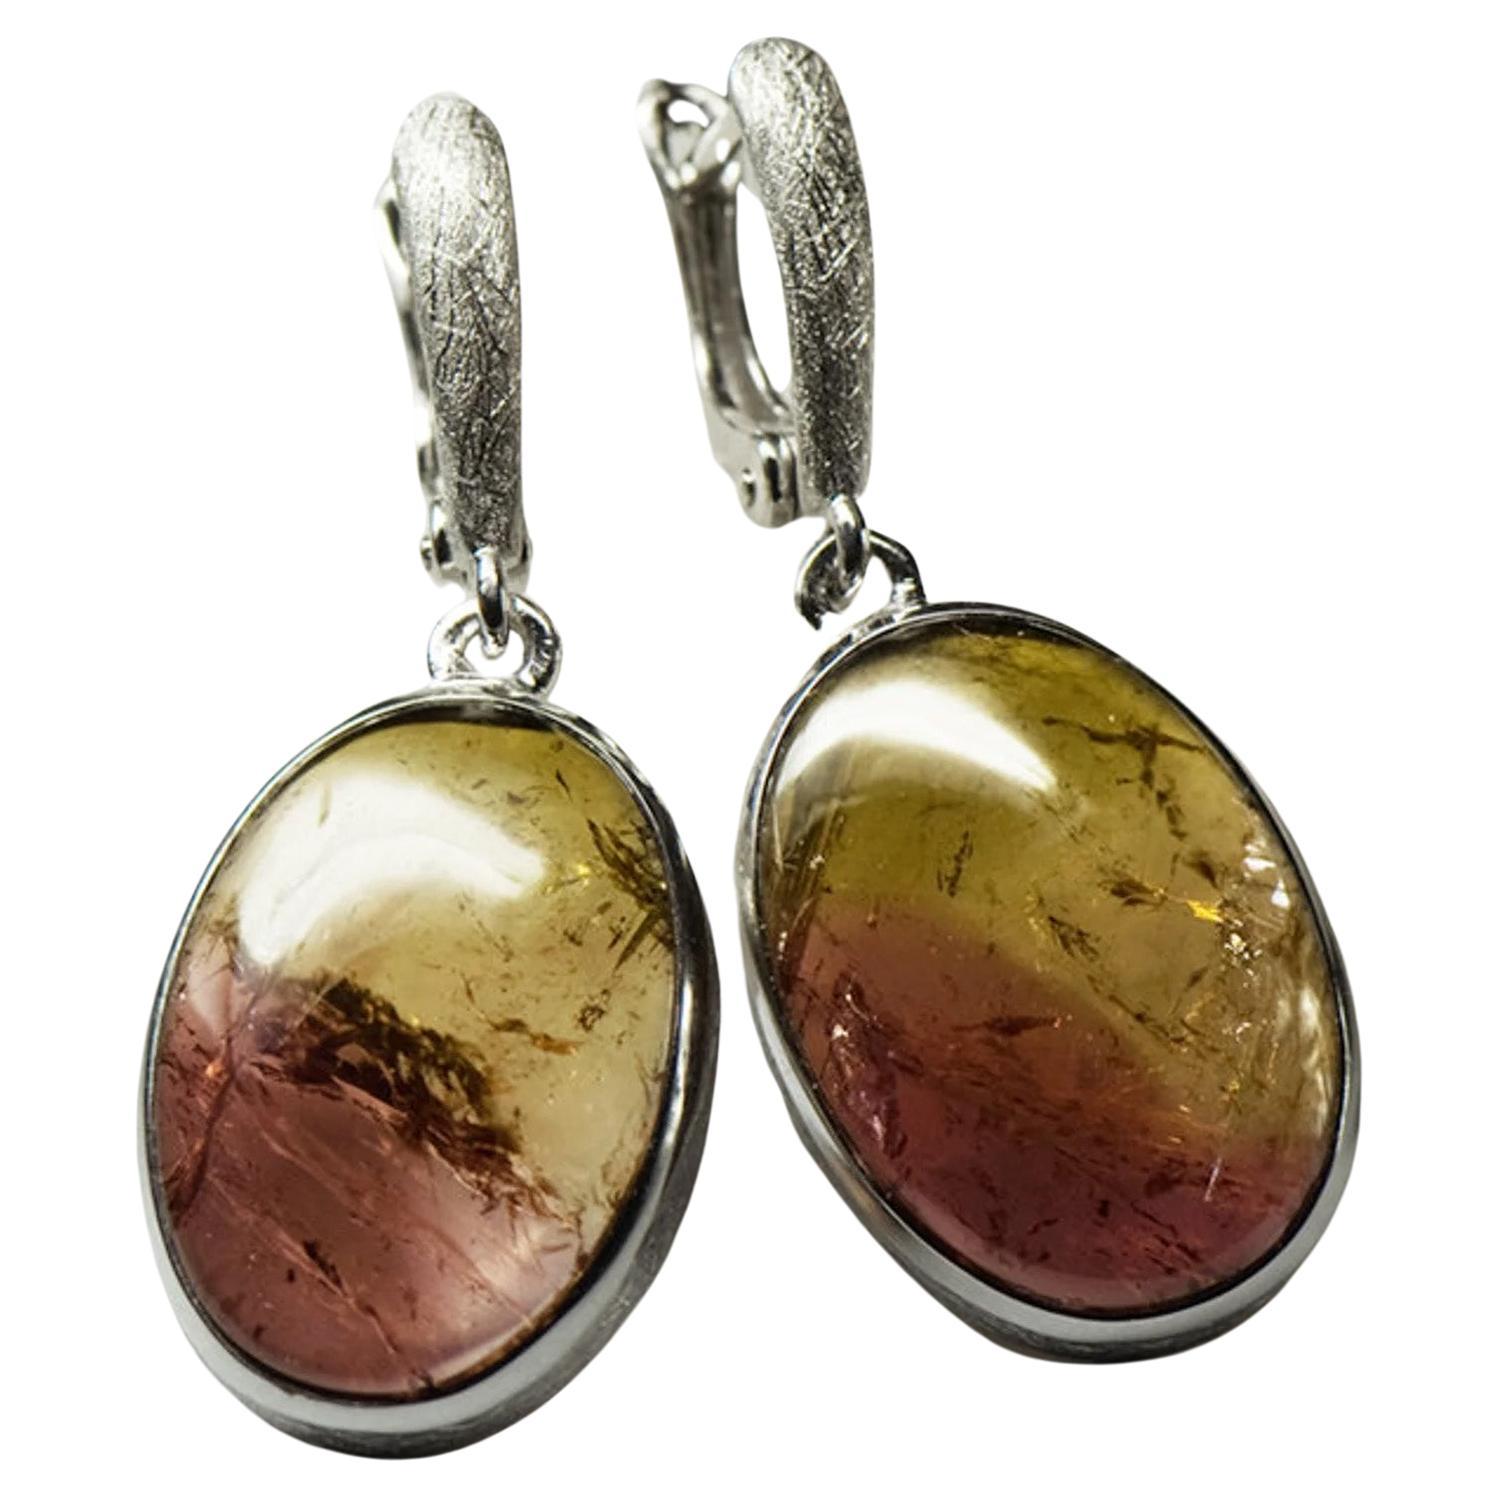 Tourmaline Silver Earrings Yellow Brown Gradient Cabochon Gem Bicolor Polychrome